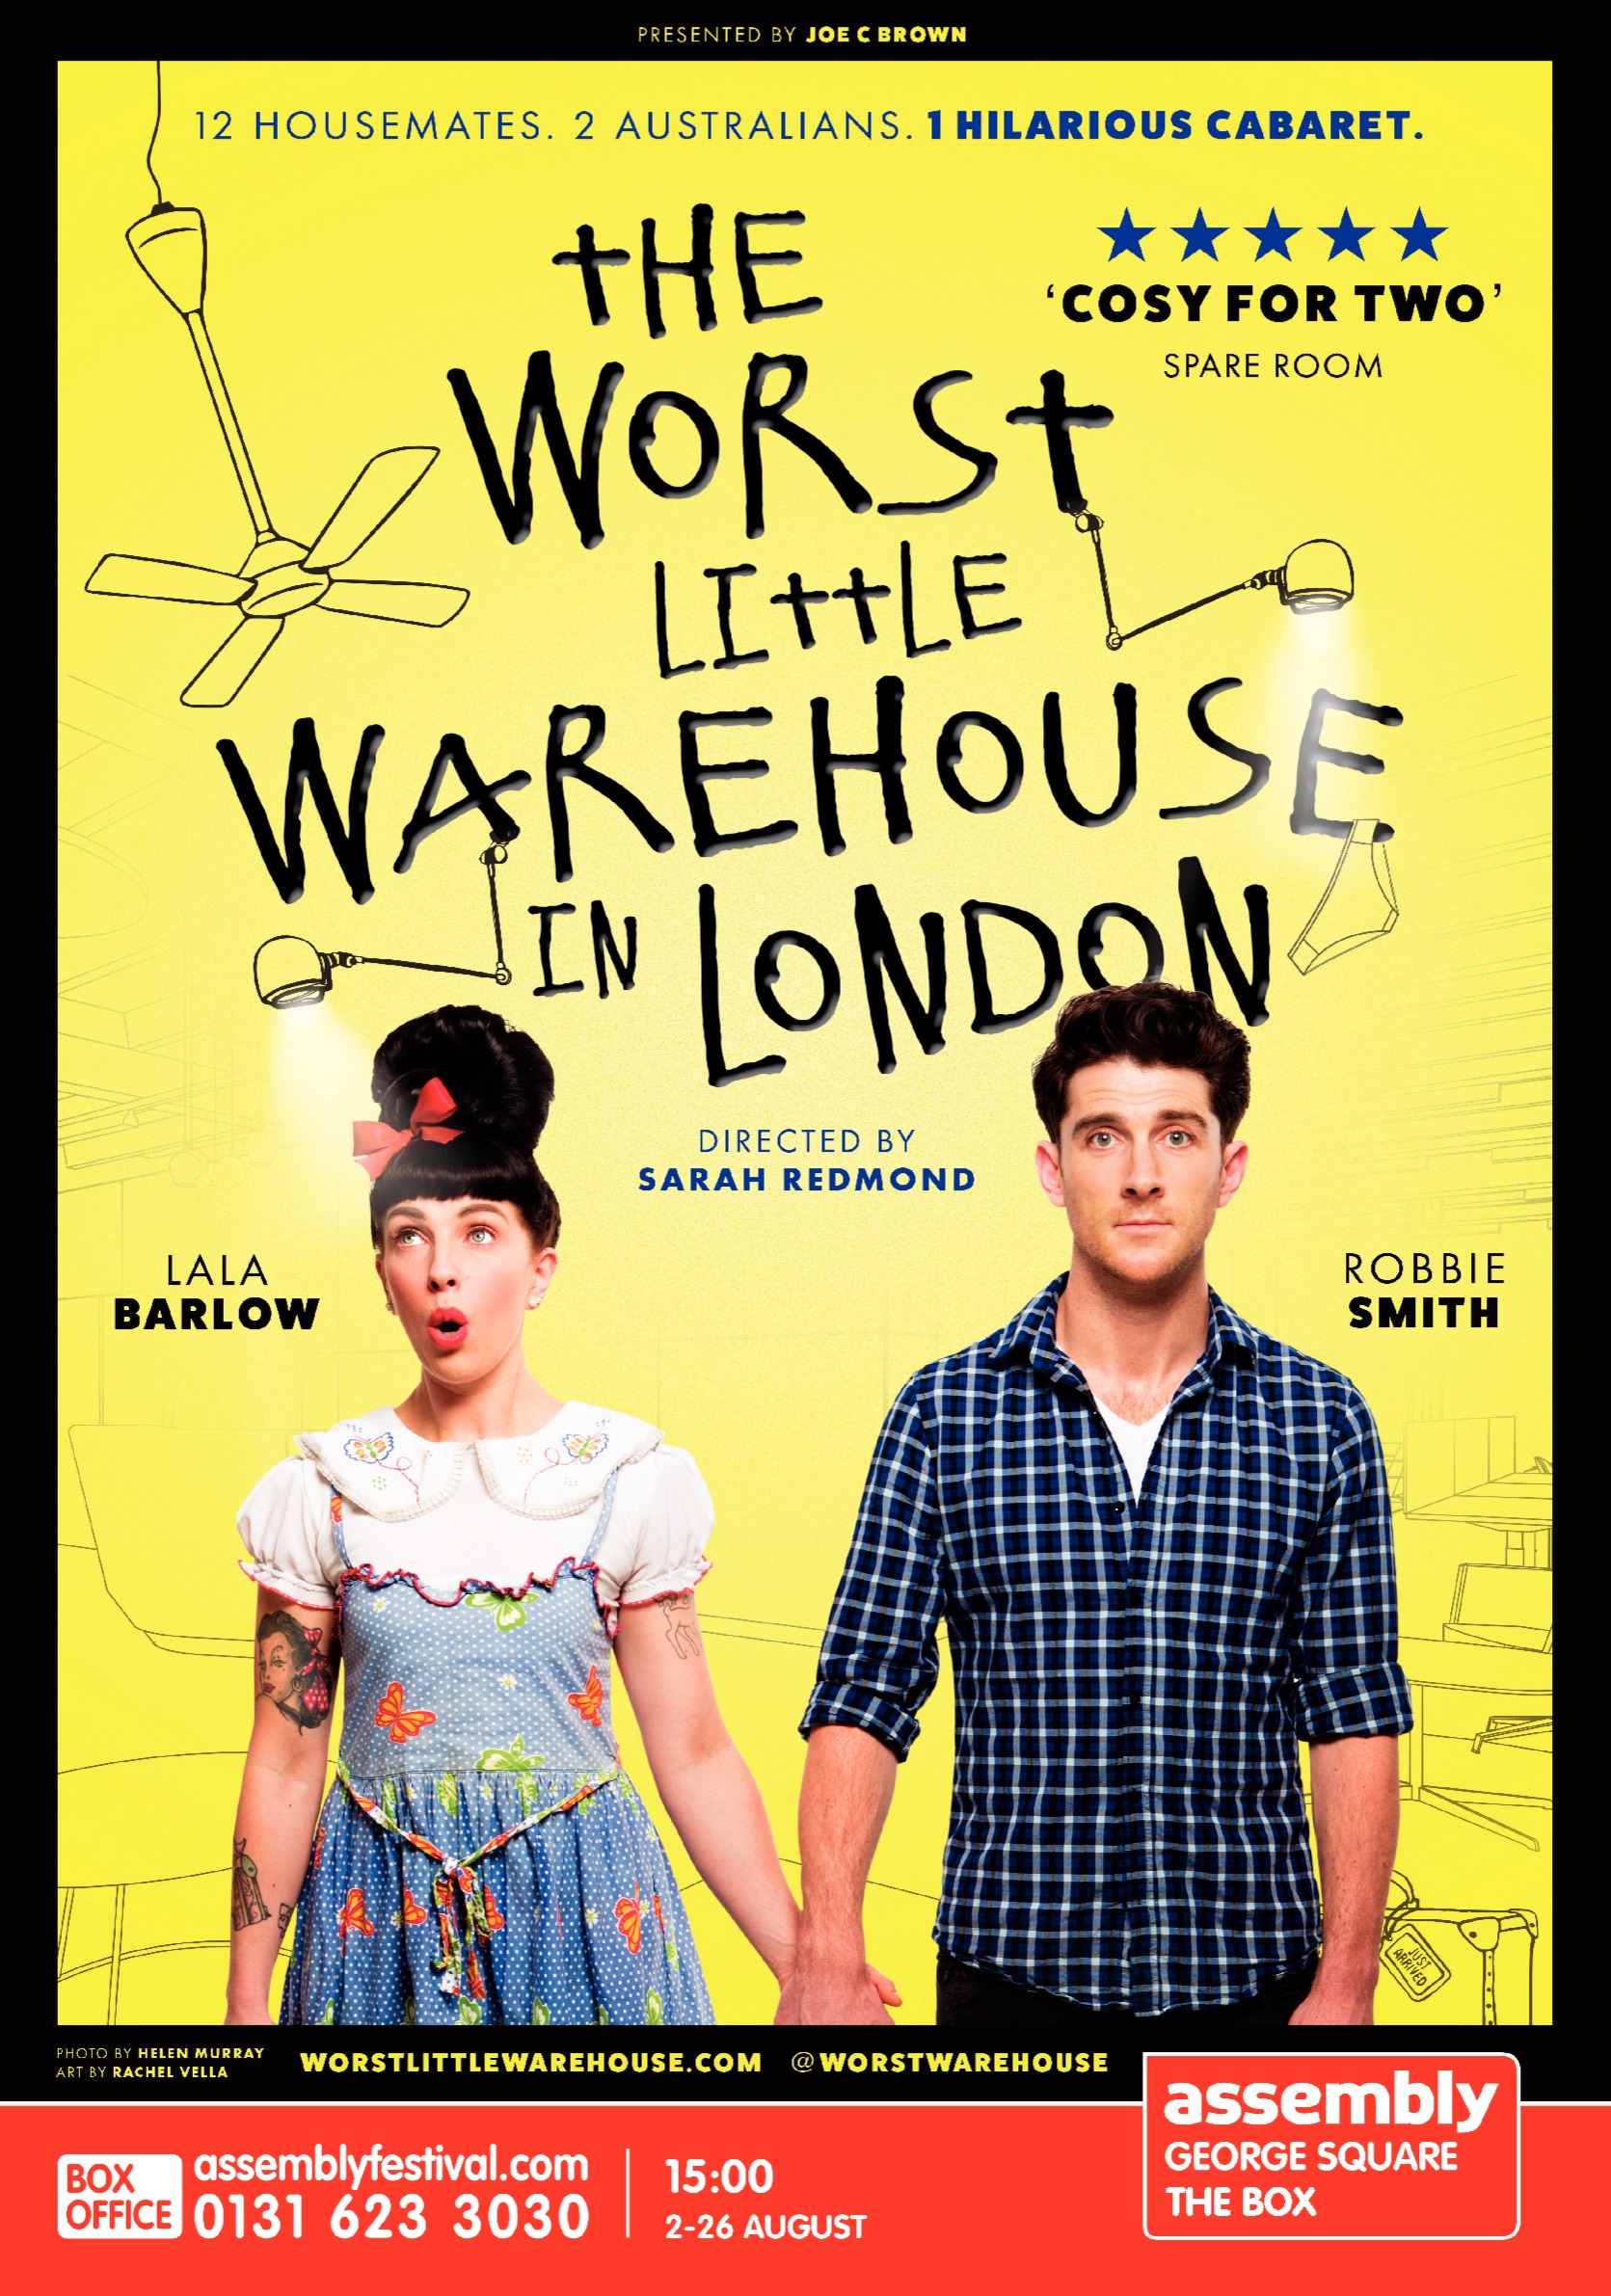 The poster for The Worst Little Warehouse In London